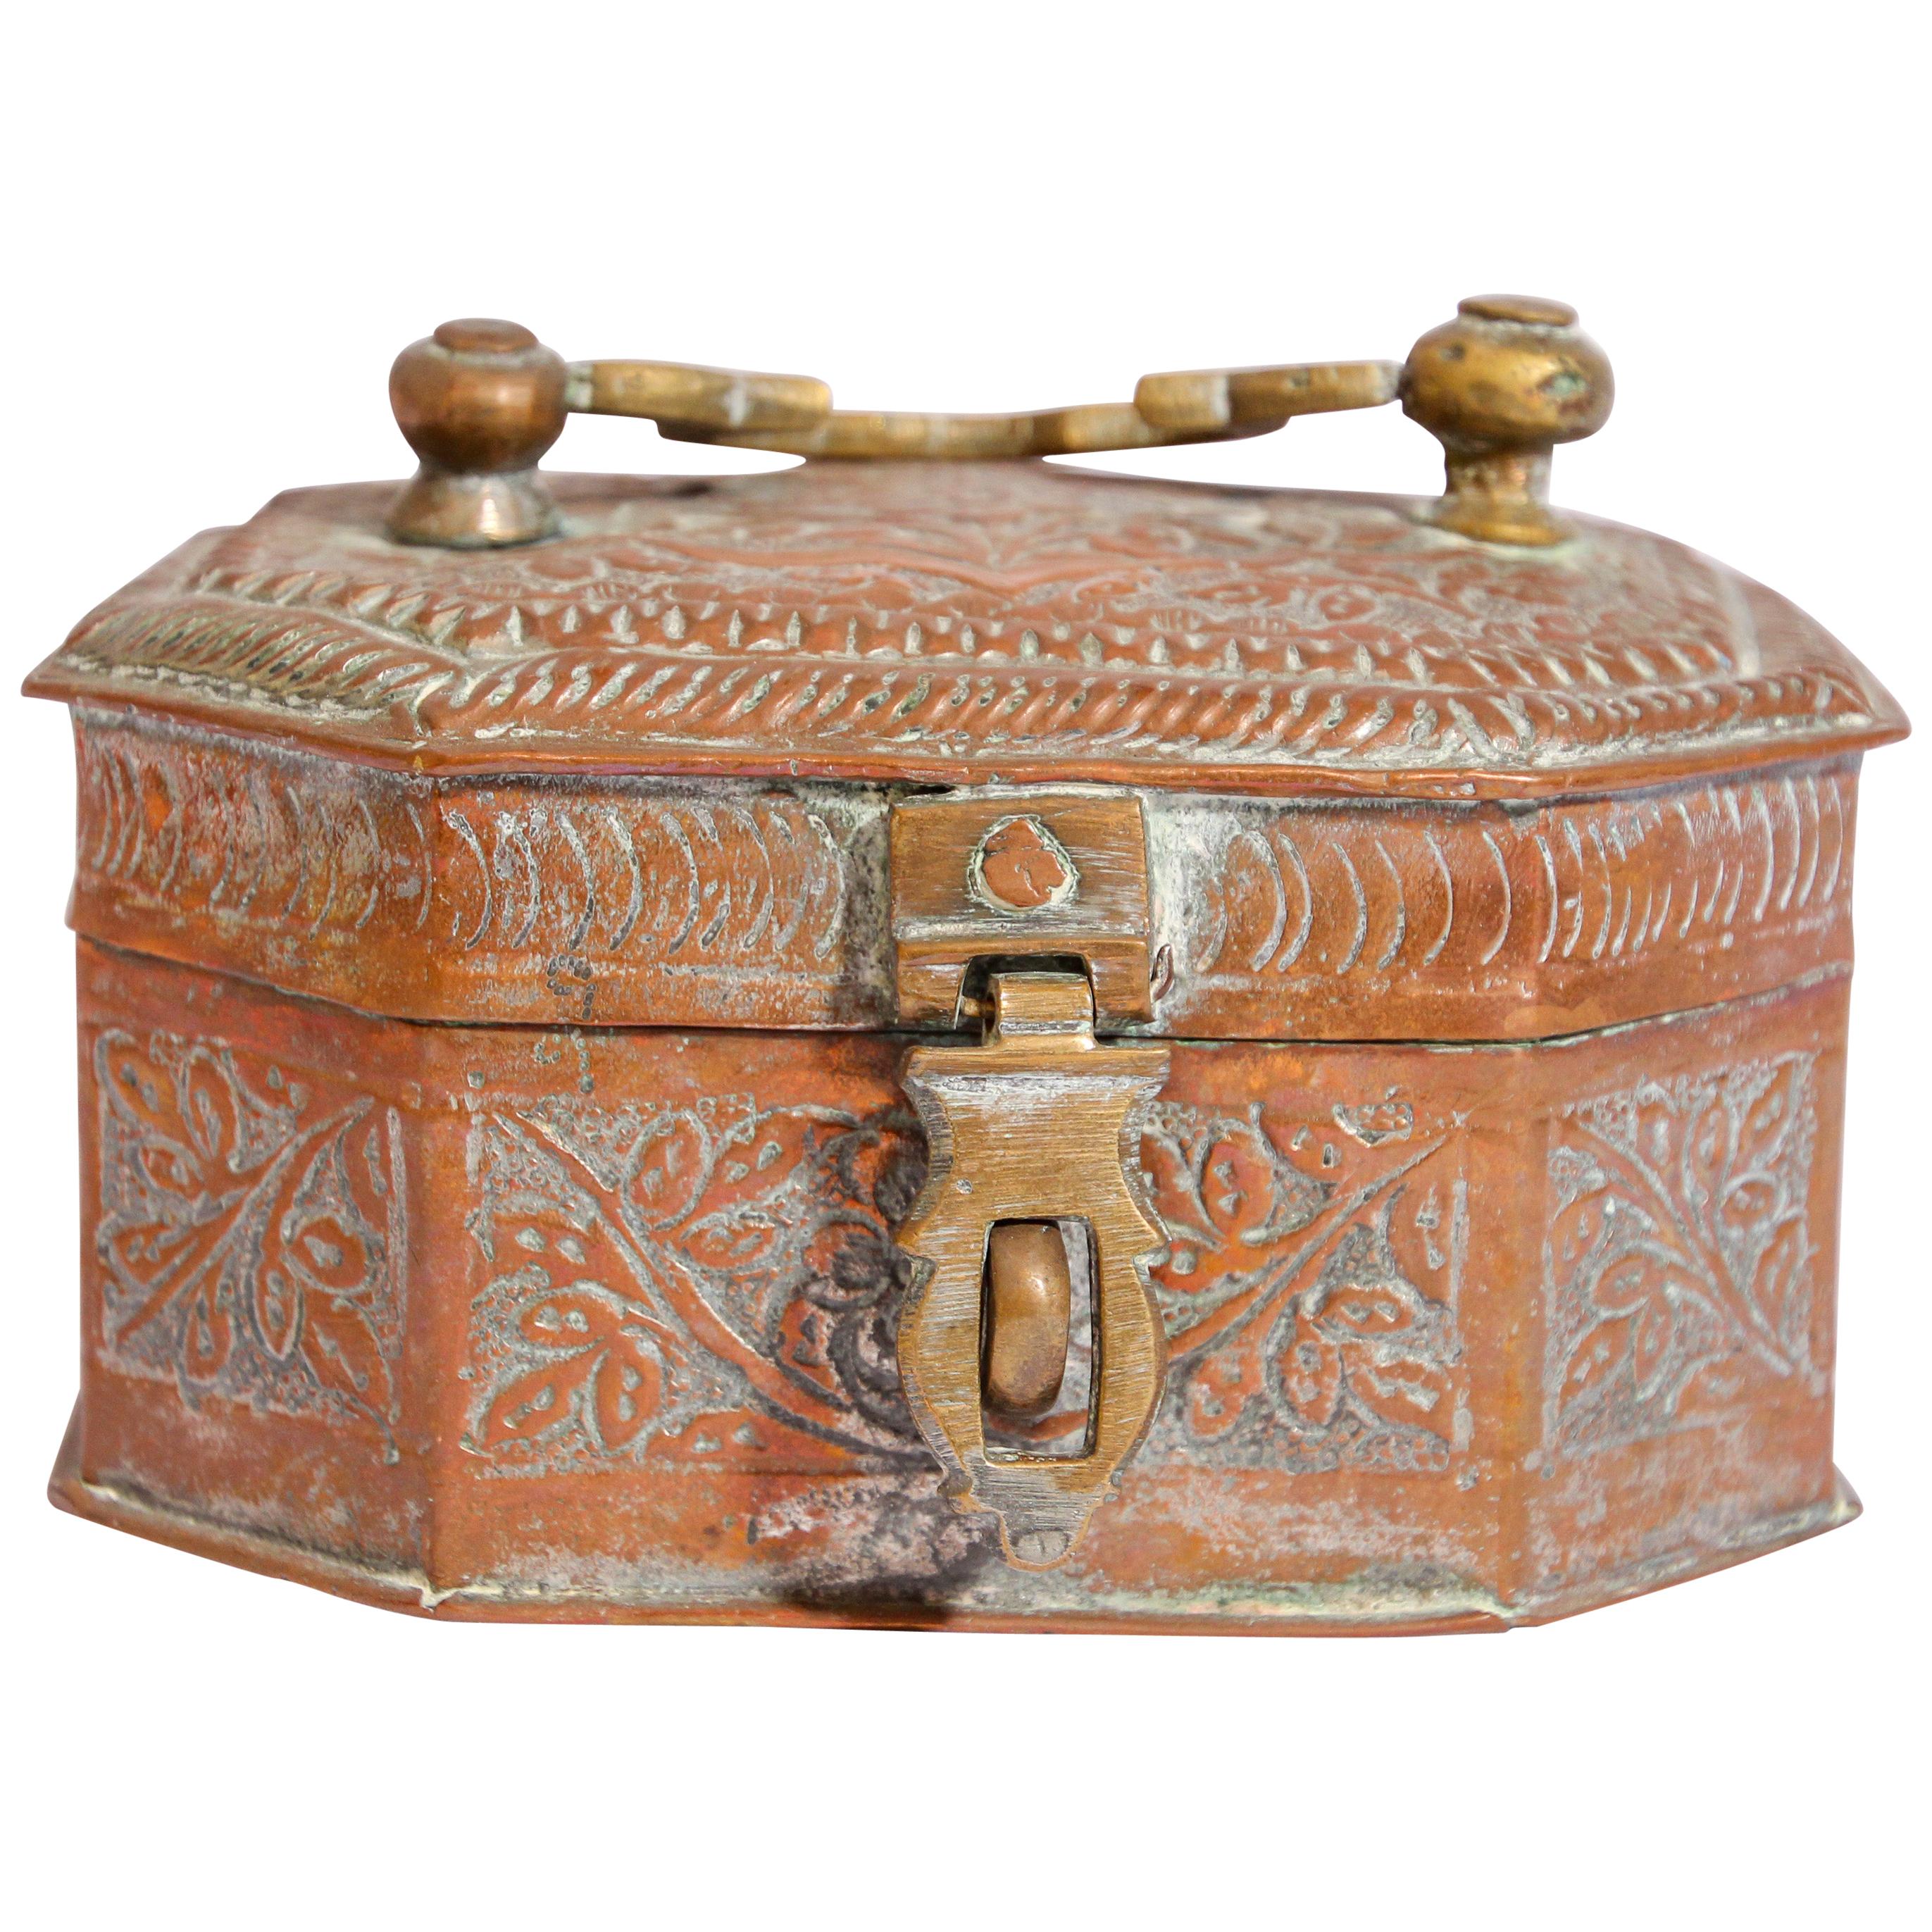 Handcrafted Antique Tinned Copper Metal Betel Box, India